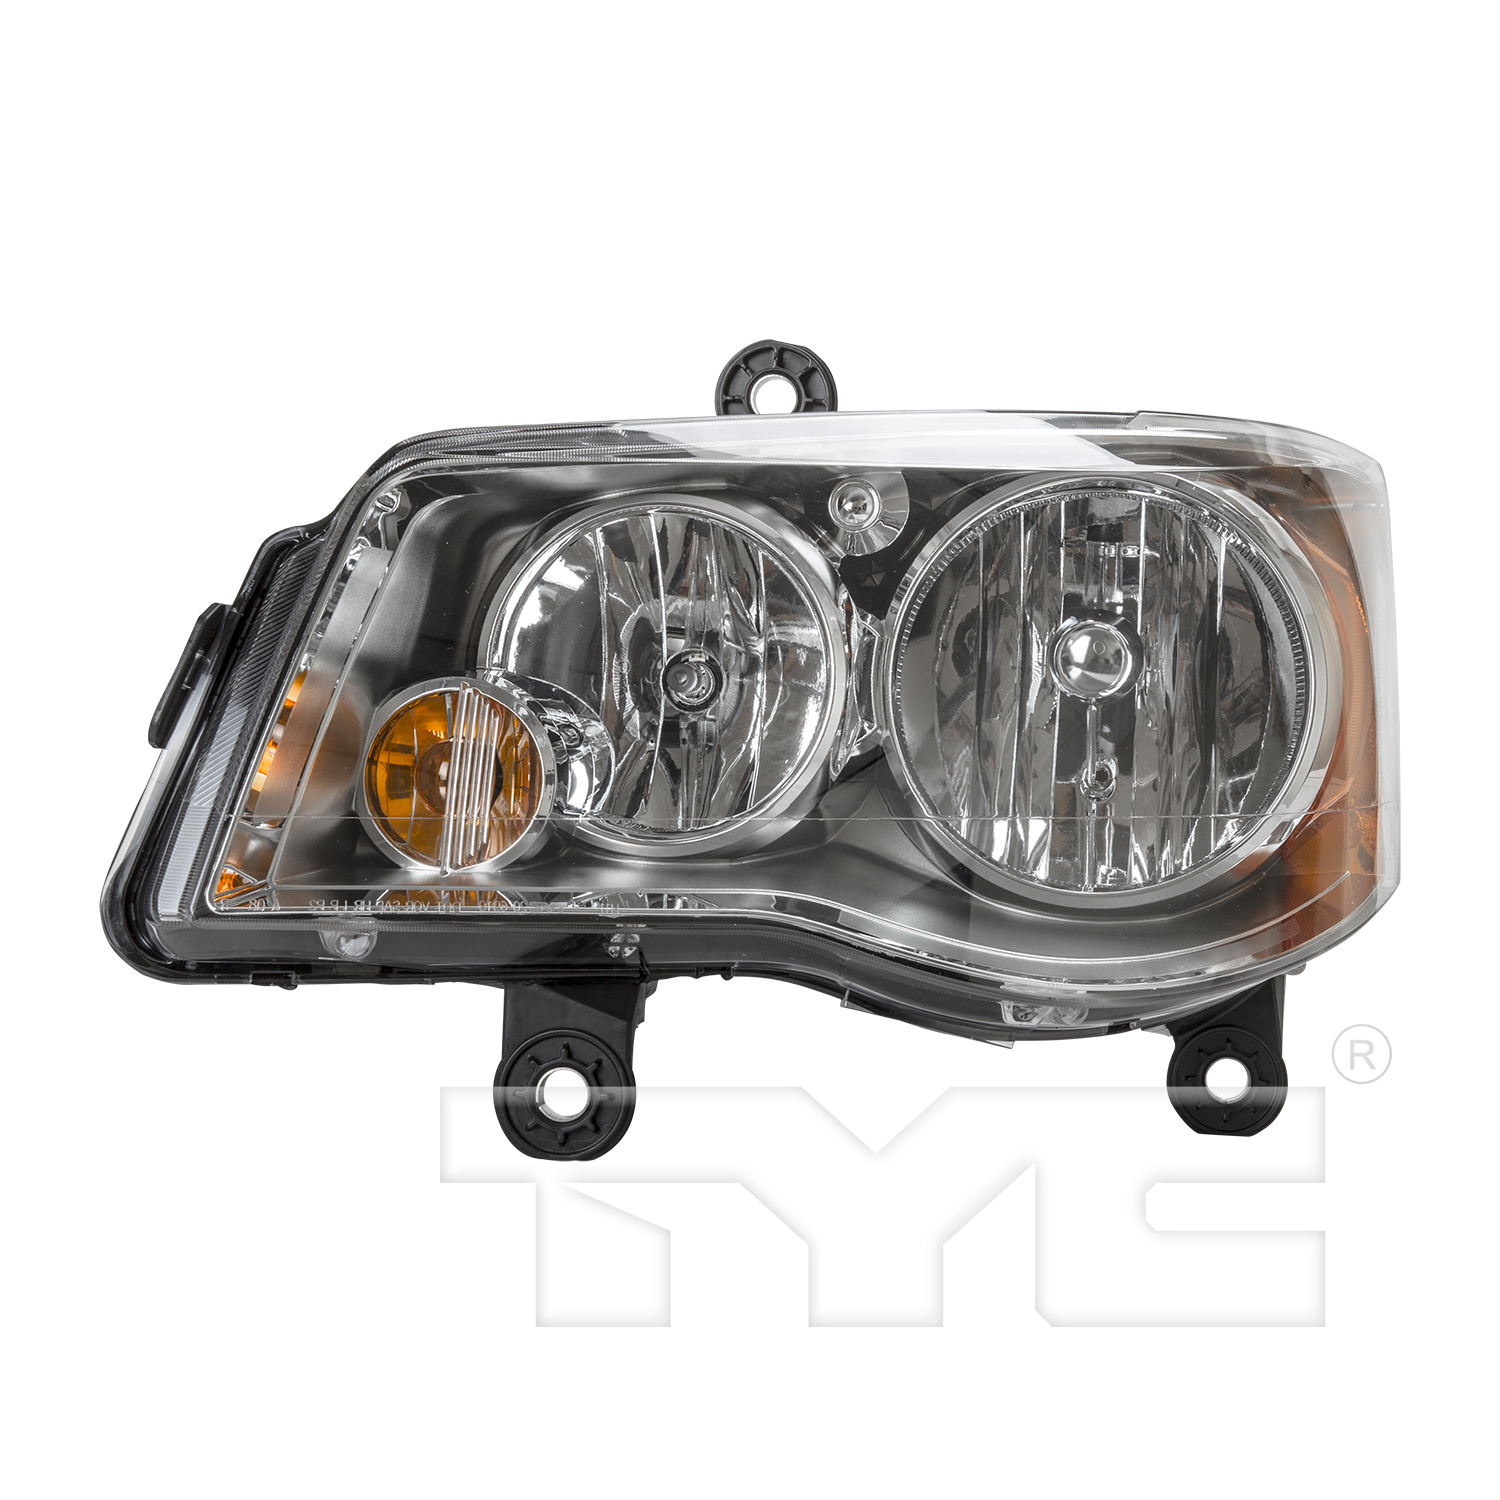 Aftermarket HEADLIGHTS for CHRYSLER - TOWN & COUNTRY, TOWN & COUNTRY,08-16,LT Headlamp assy composite